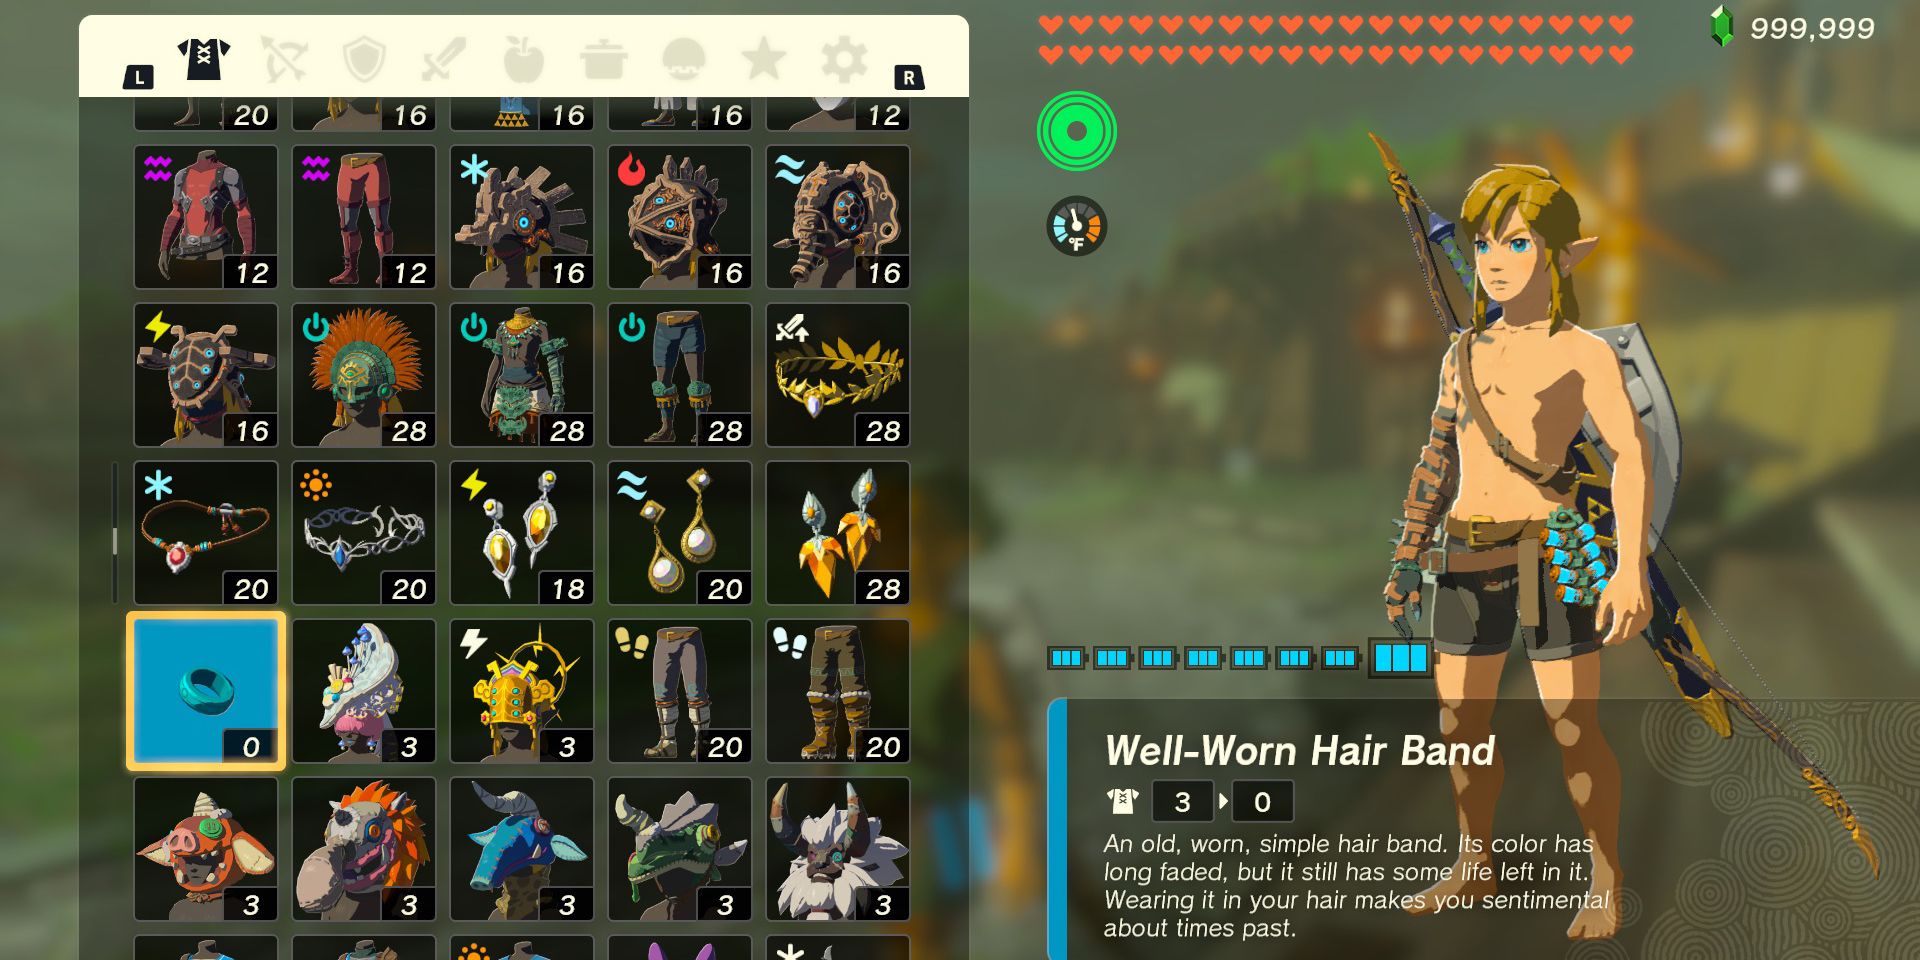 The Well-Worn Hair Band armor piece in The Legend of Zelda: Tears of the Kingdom